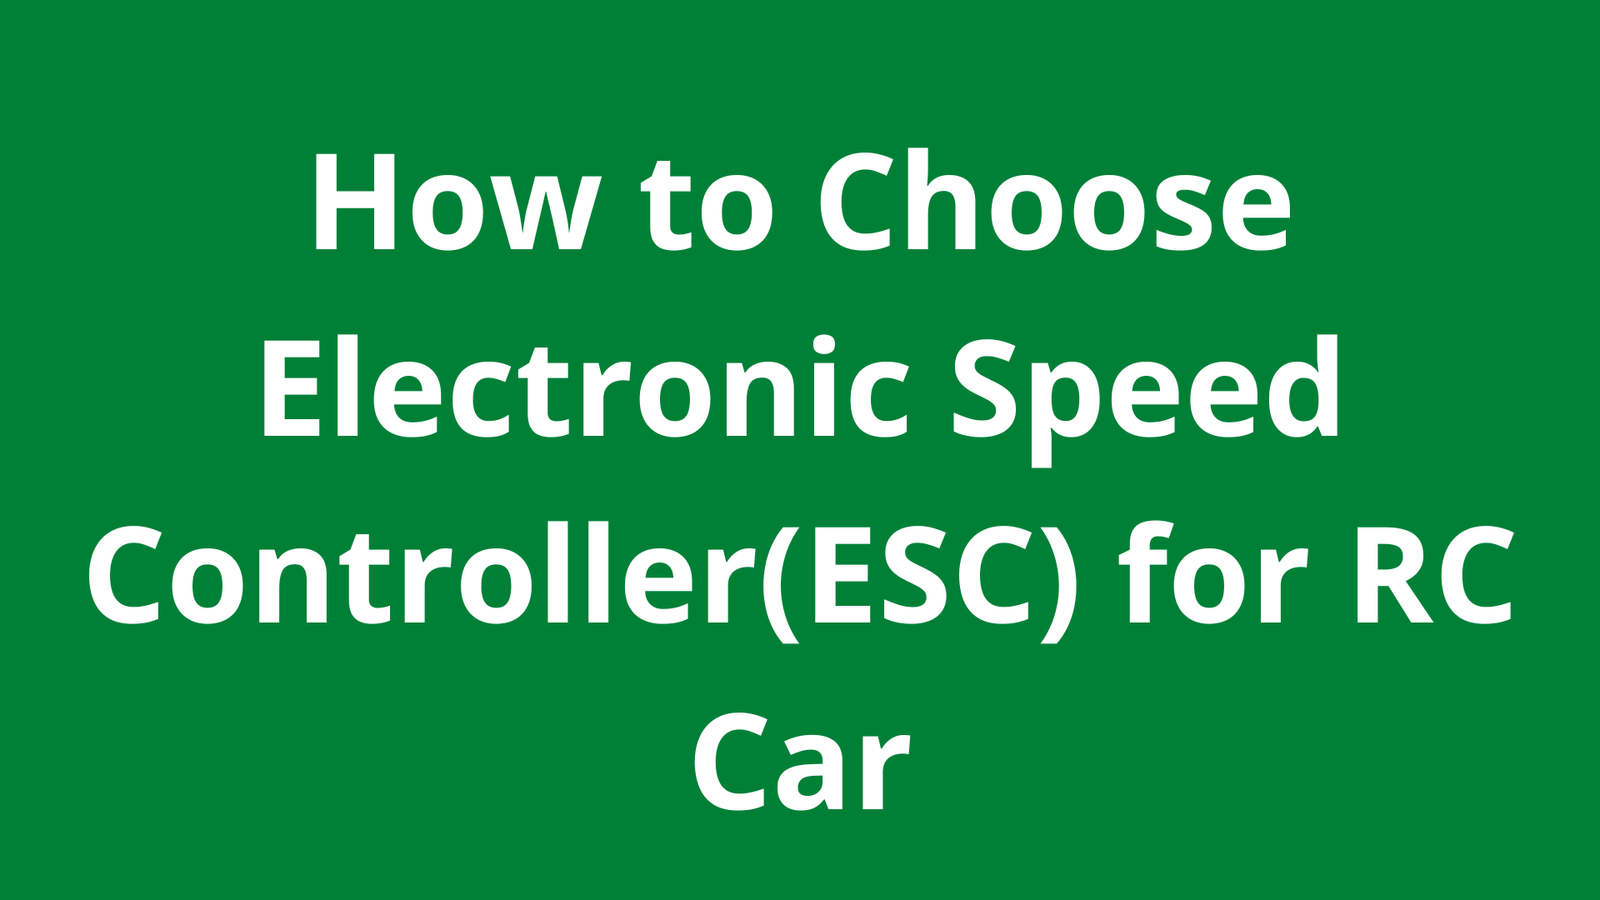 How to Choose Electronic Speed Controller(ESC) for RC Car